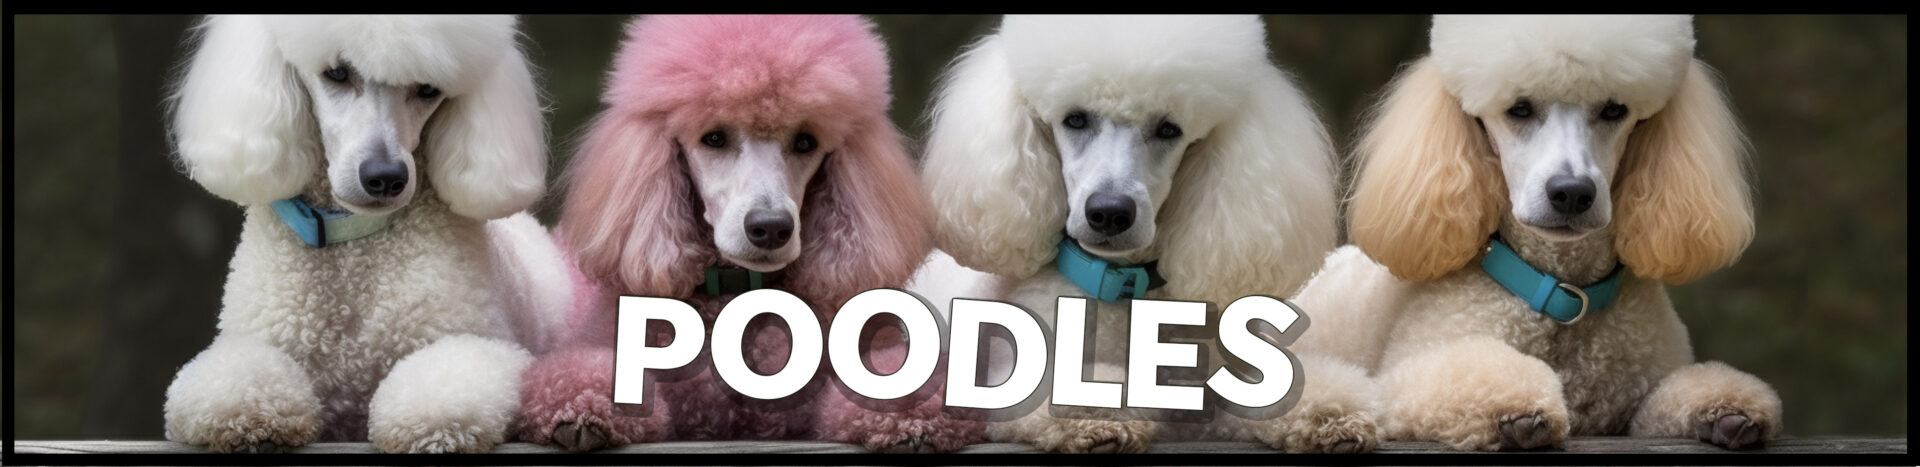 Poodle Gifts - Mowbi Brand Gifts